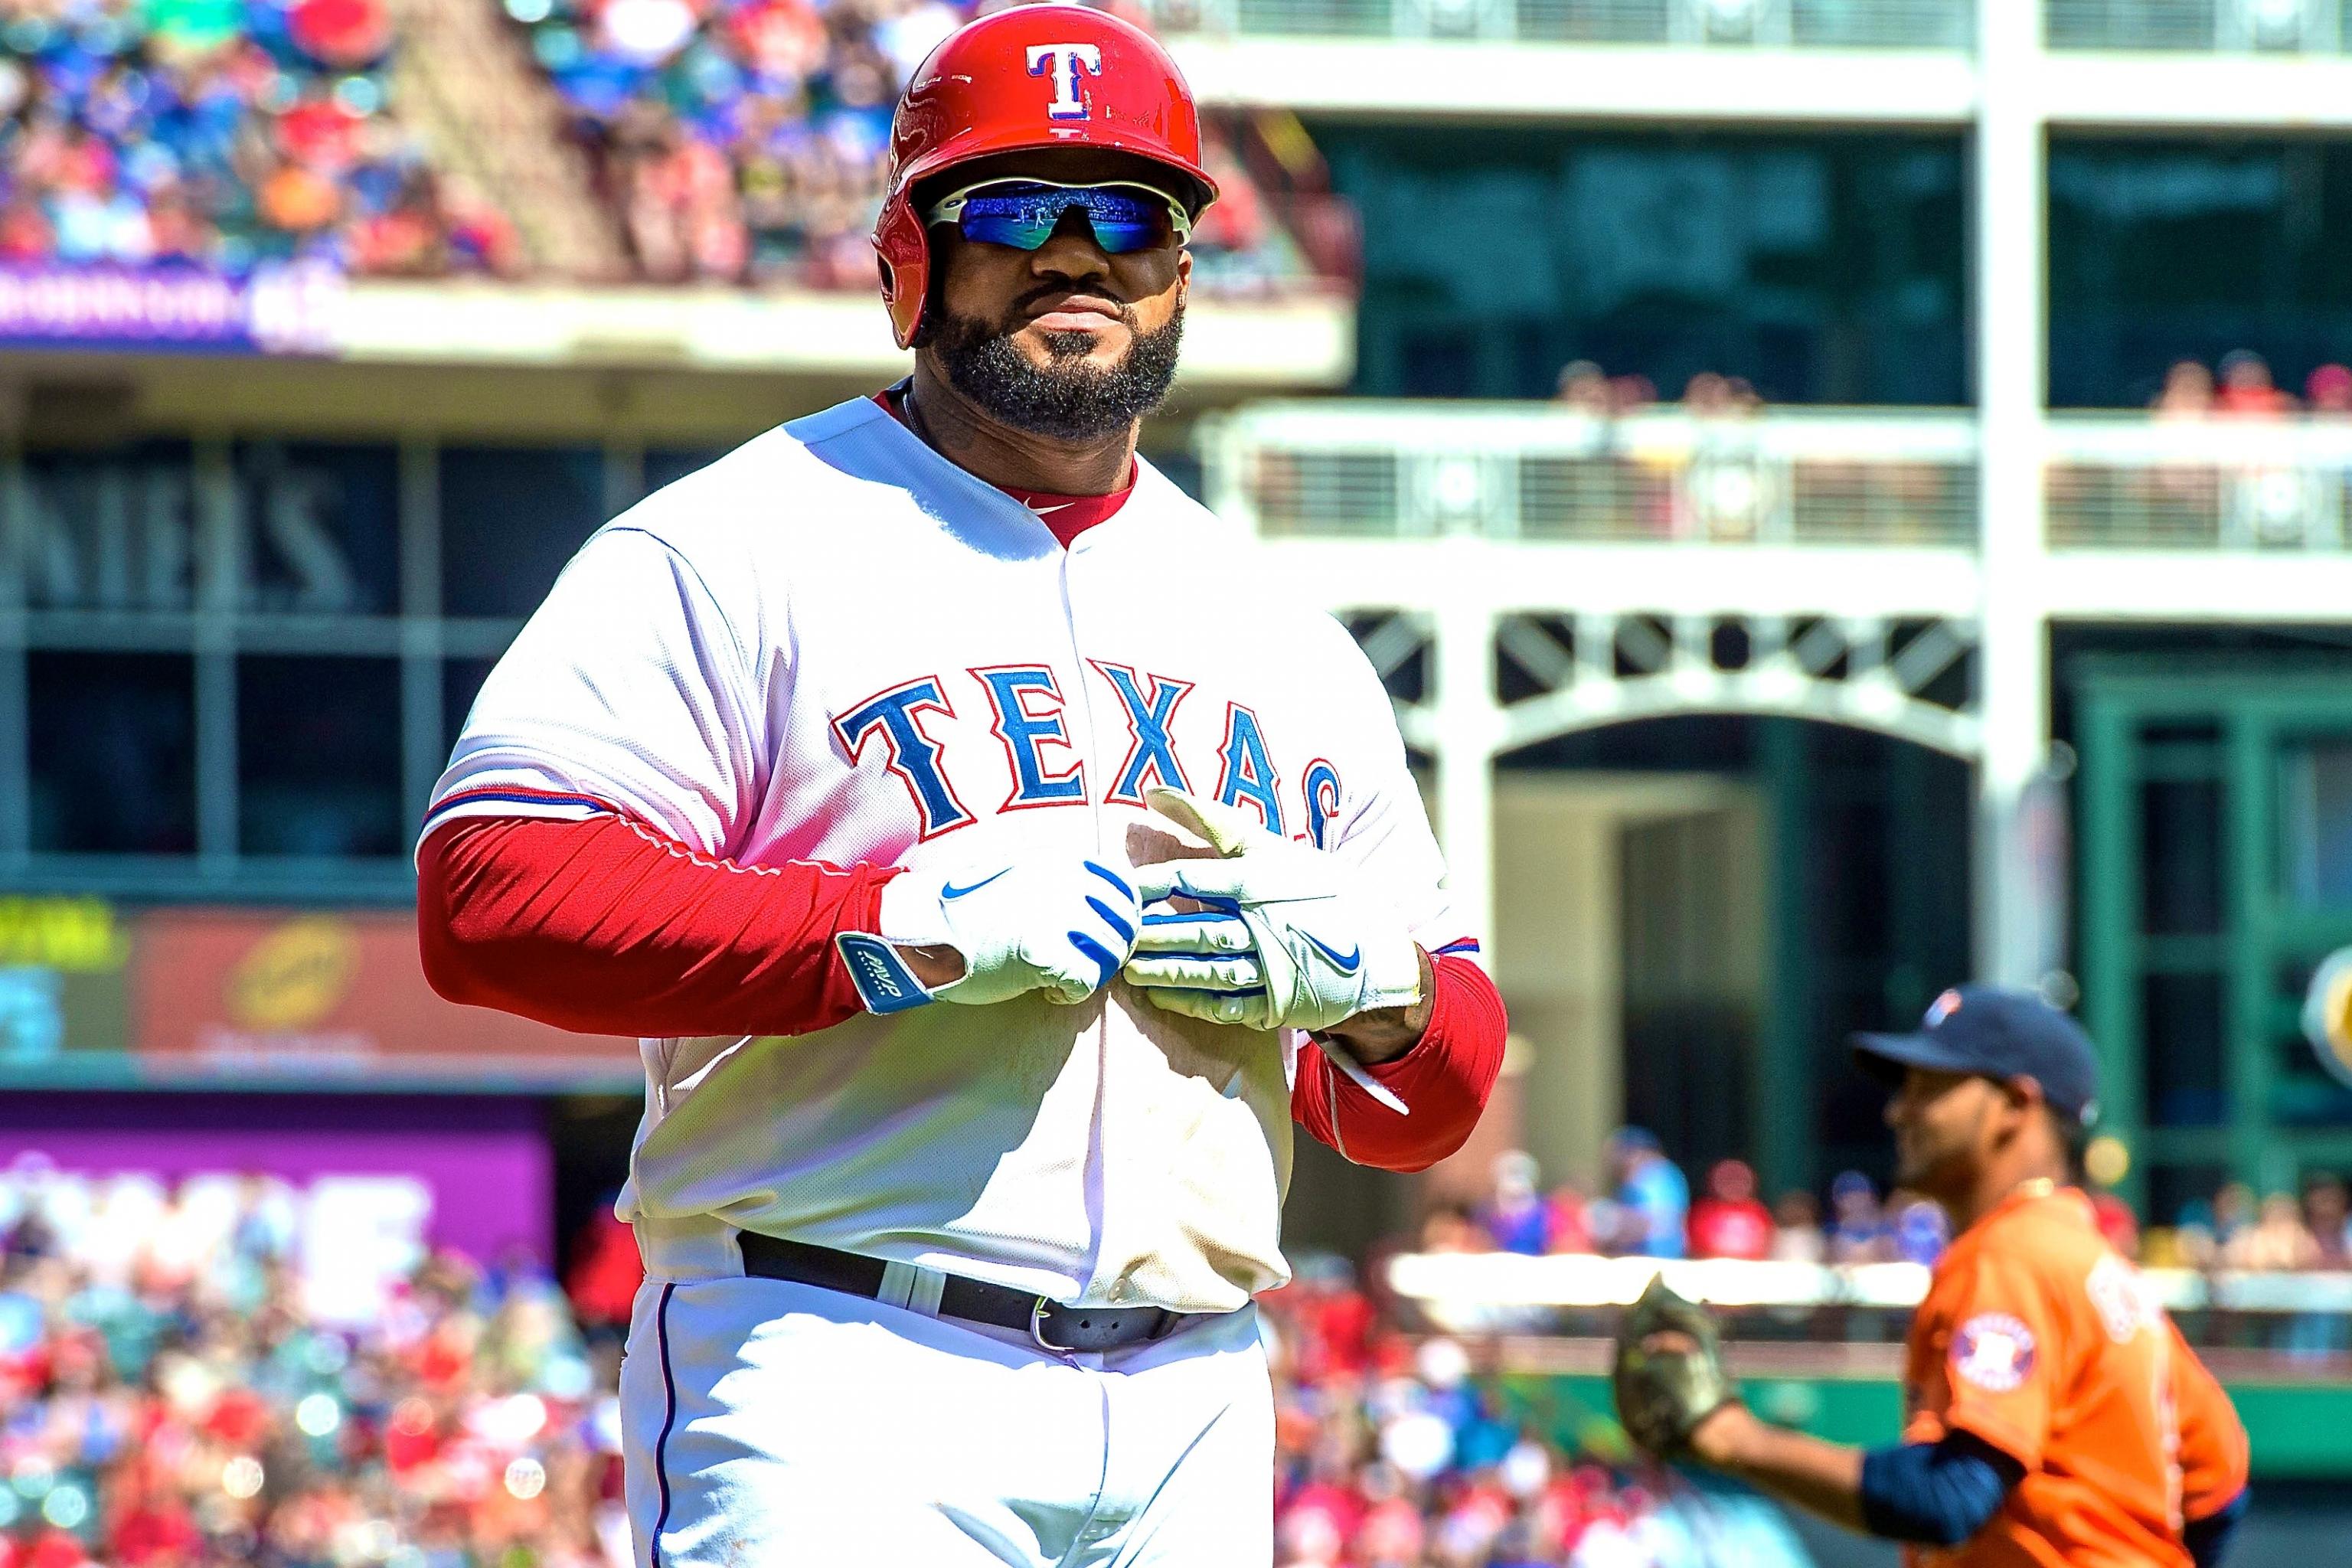 Neck injury to end Prince Fielder's career